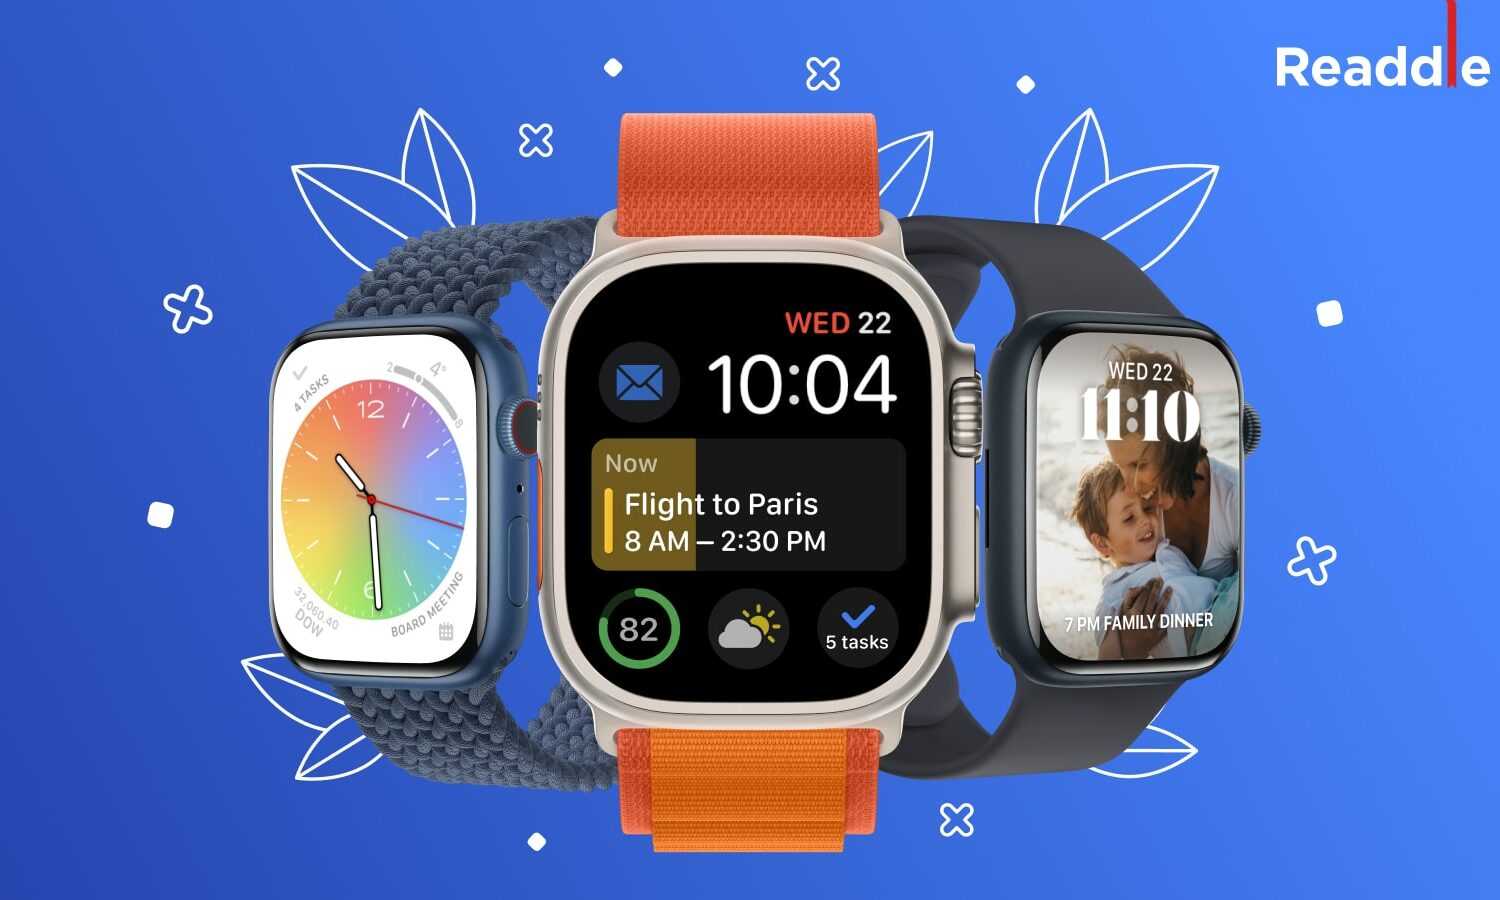 Marketing image promoting the new Readdle Calendars app for Apple Watch